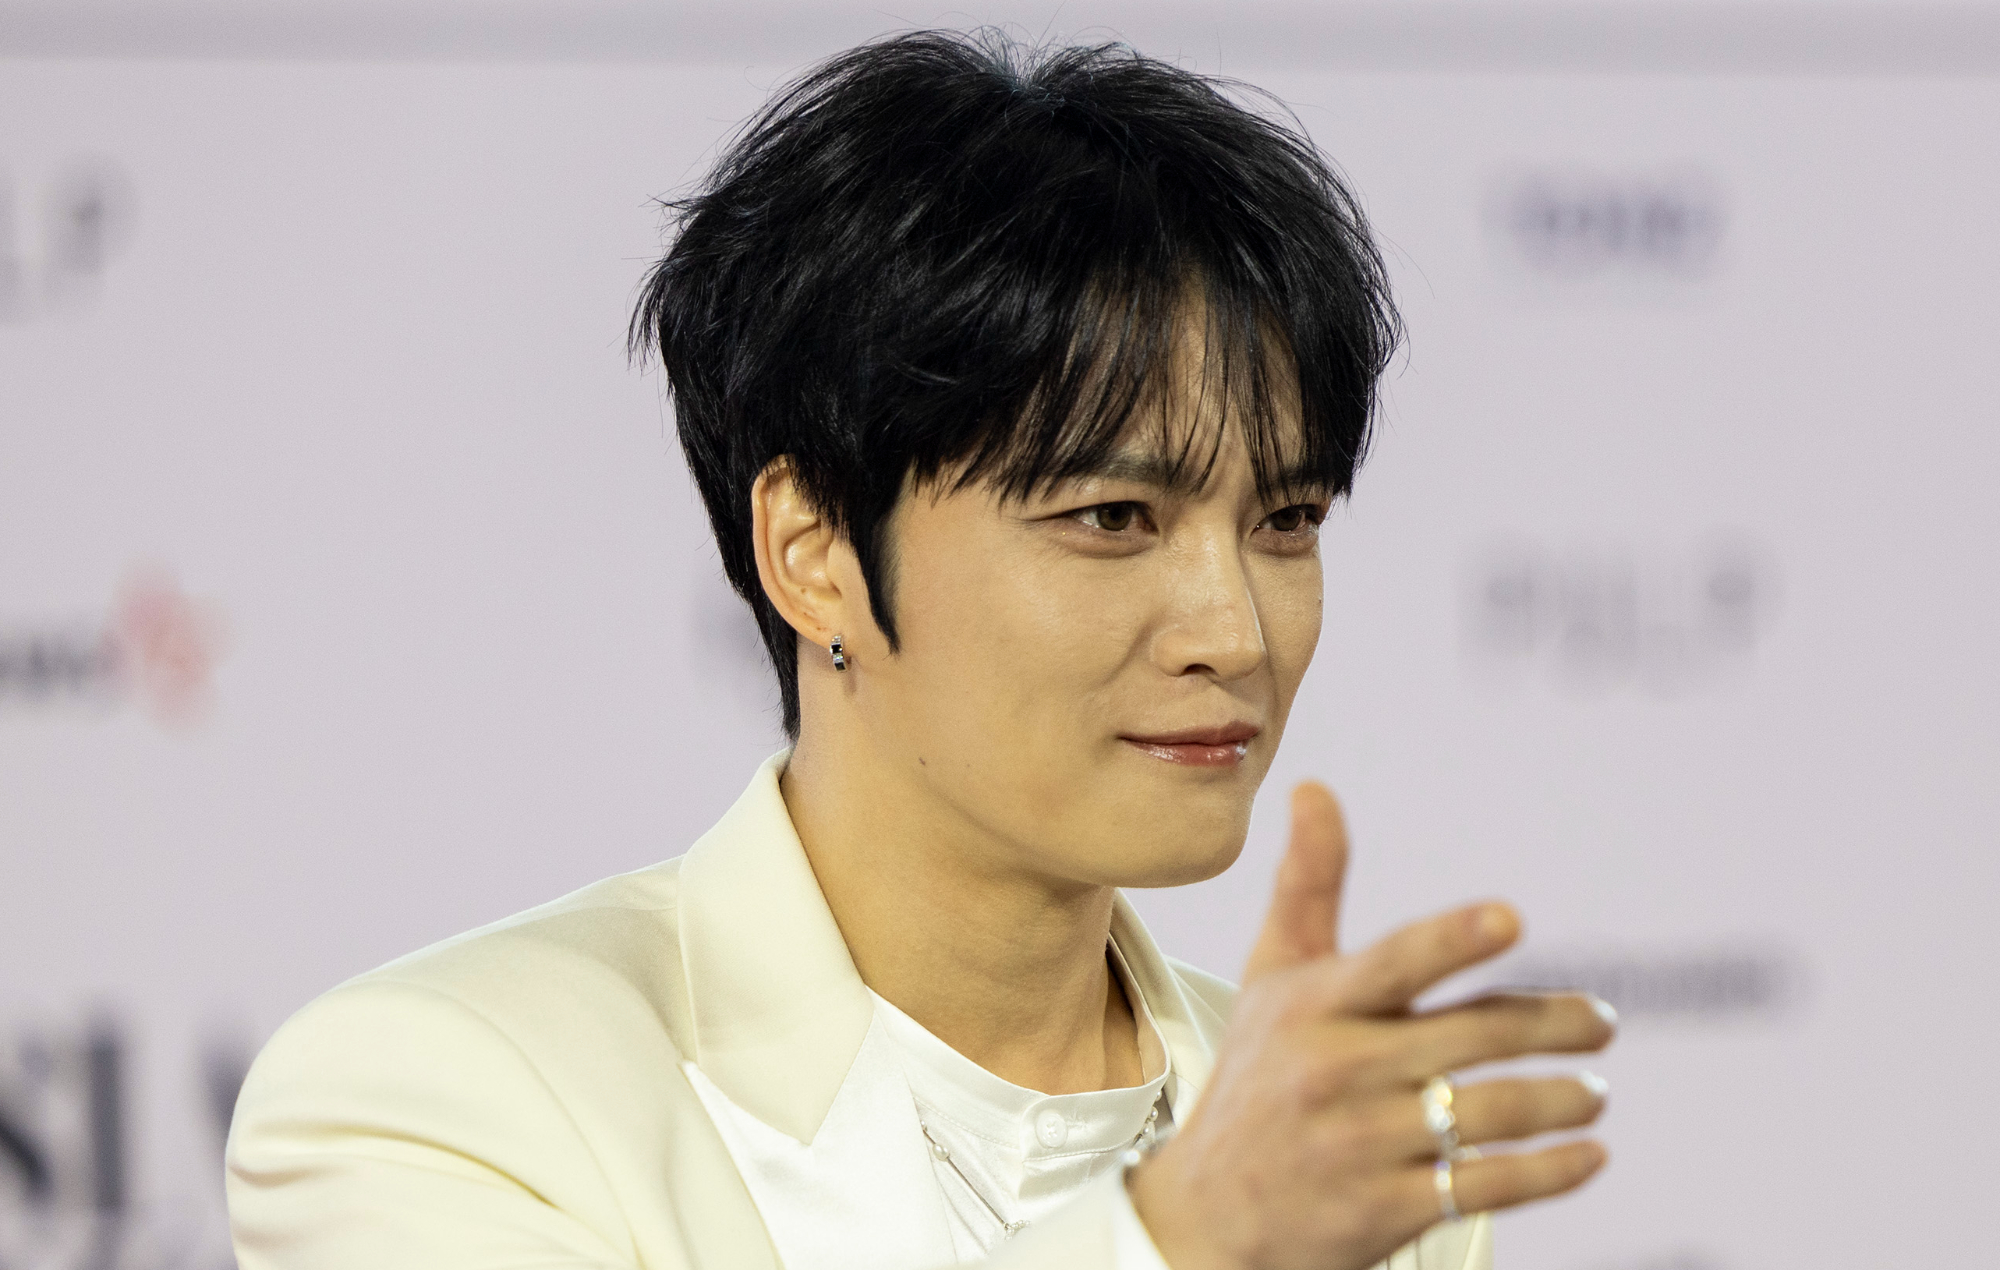 Kim Jae-joong recounts “creepy” experiences with stalker fans: “They had come in and taken pictures”